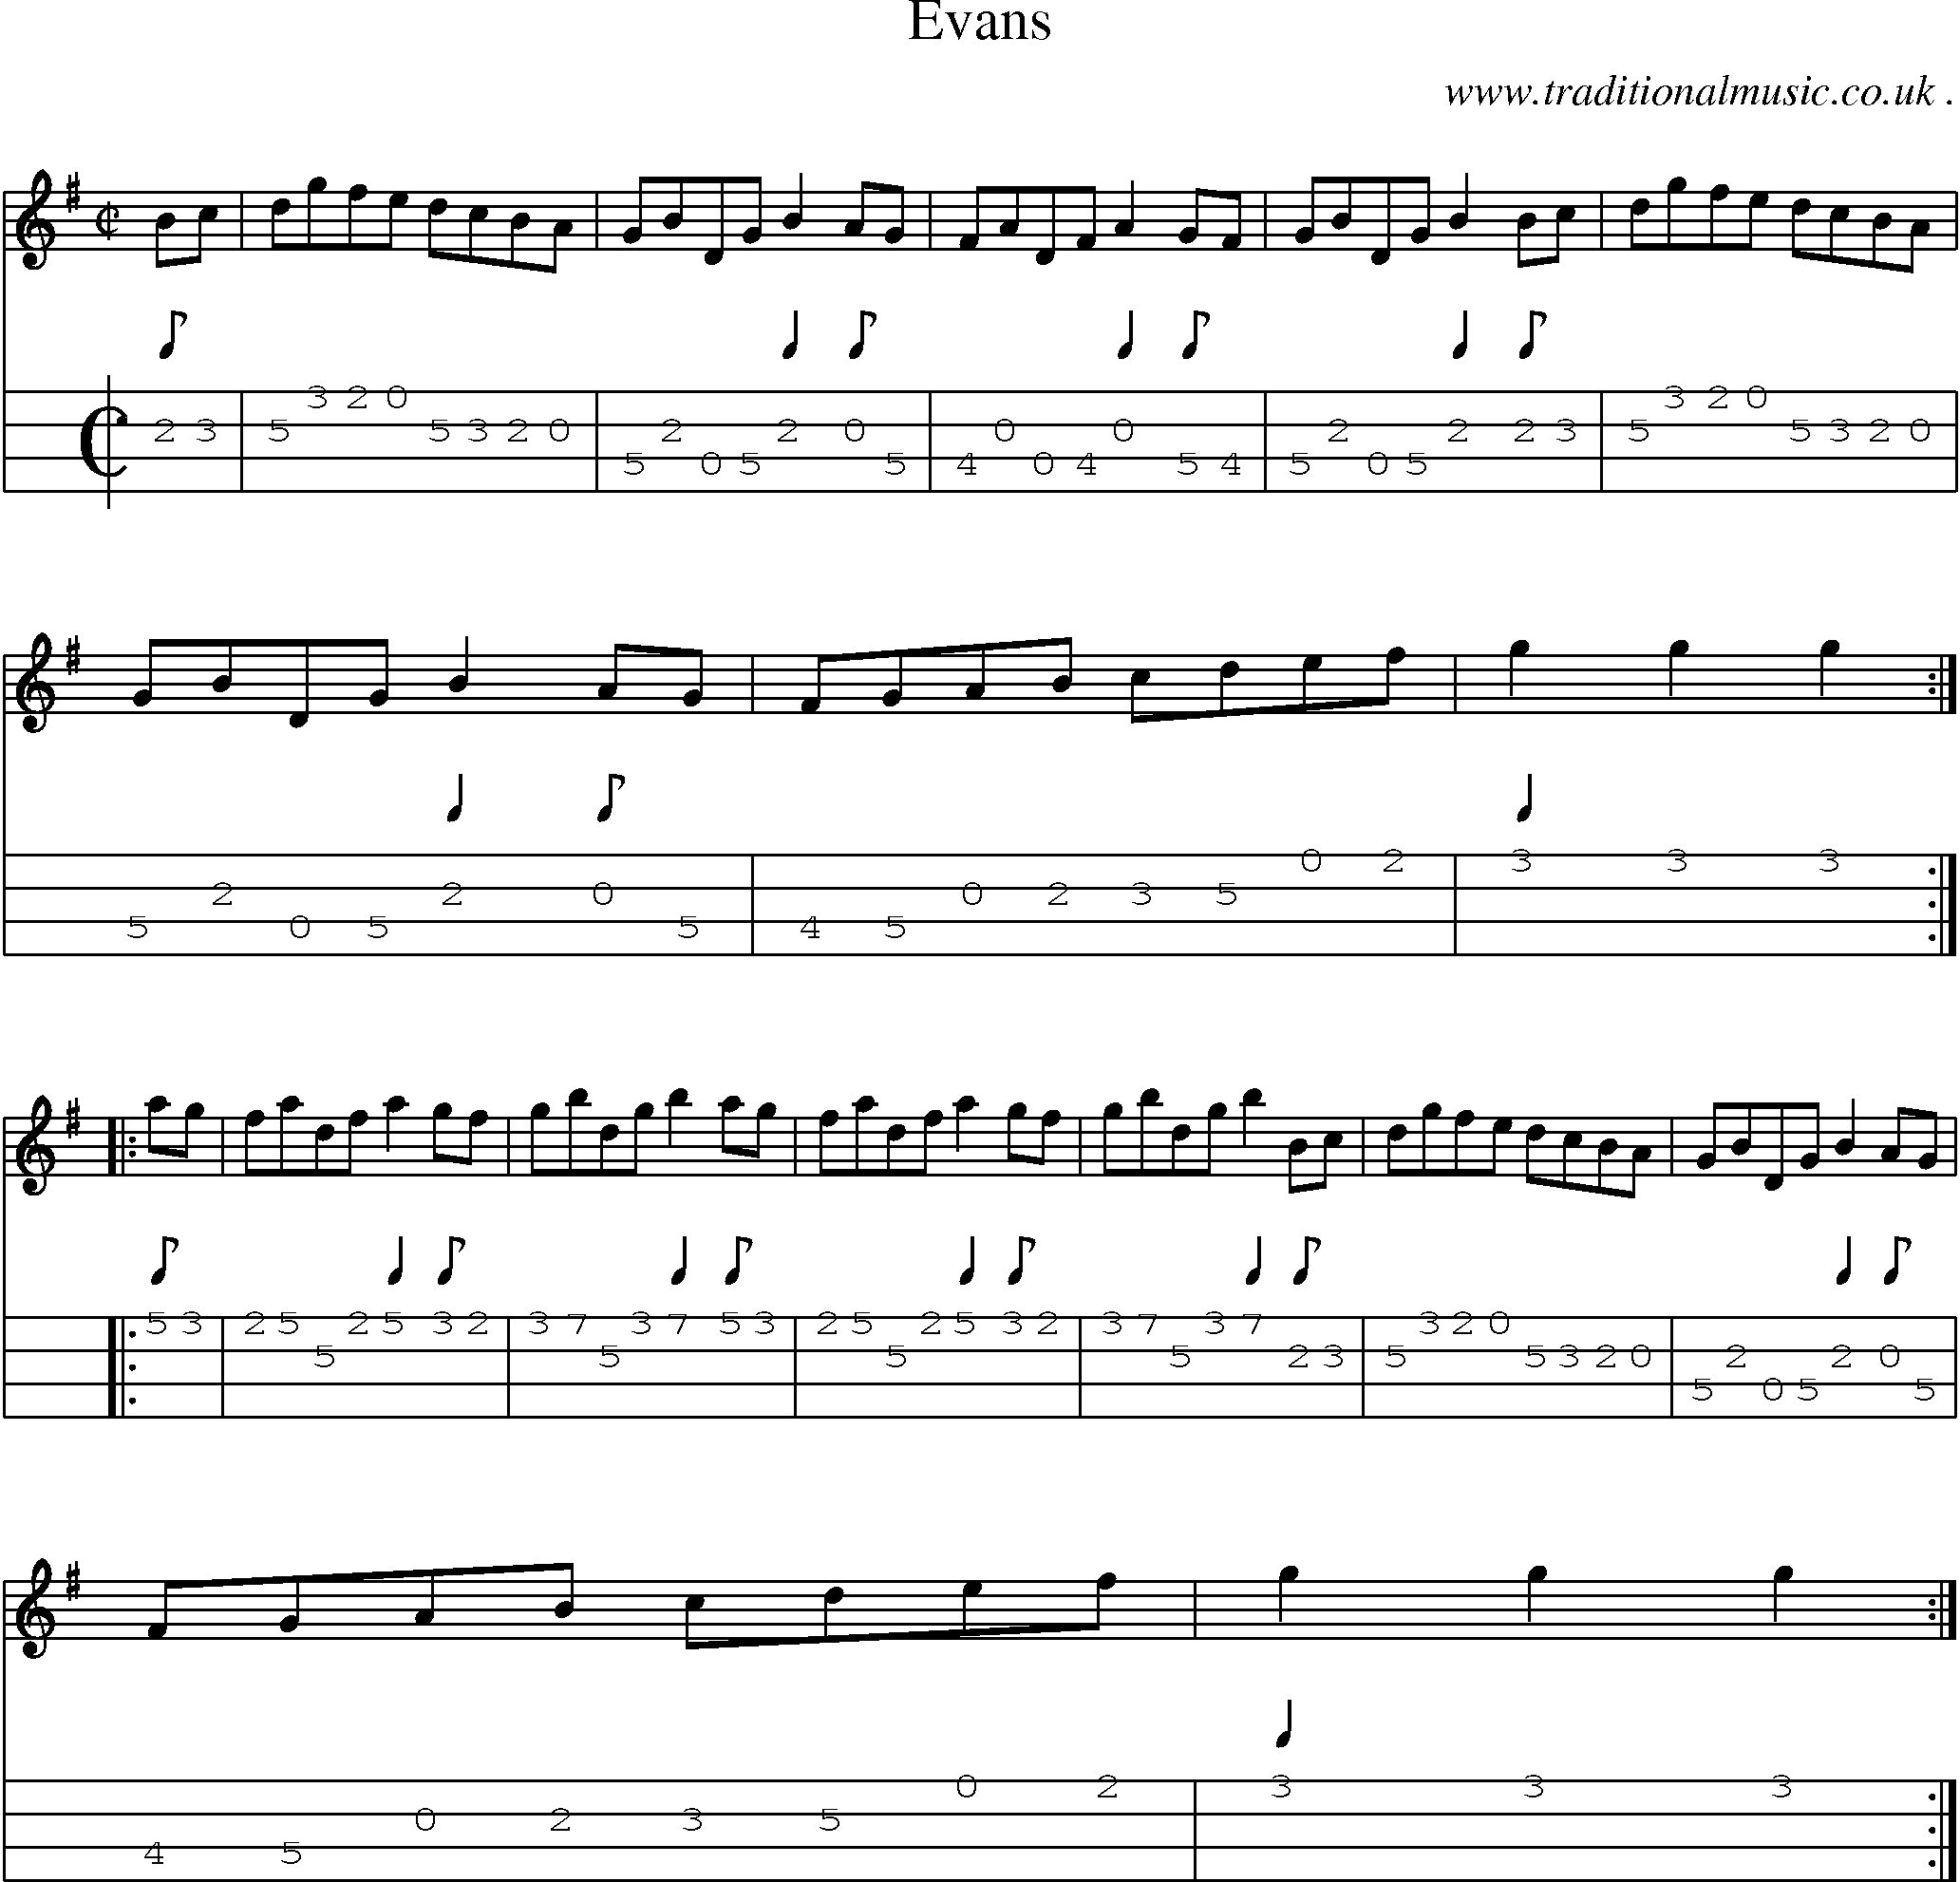 Sheet-music  score, Chords and Mandolin Tabs for Evans